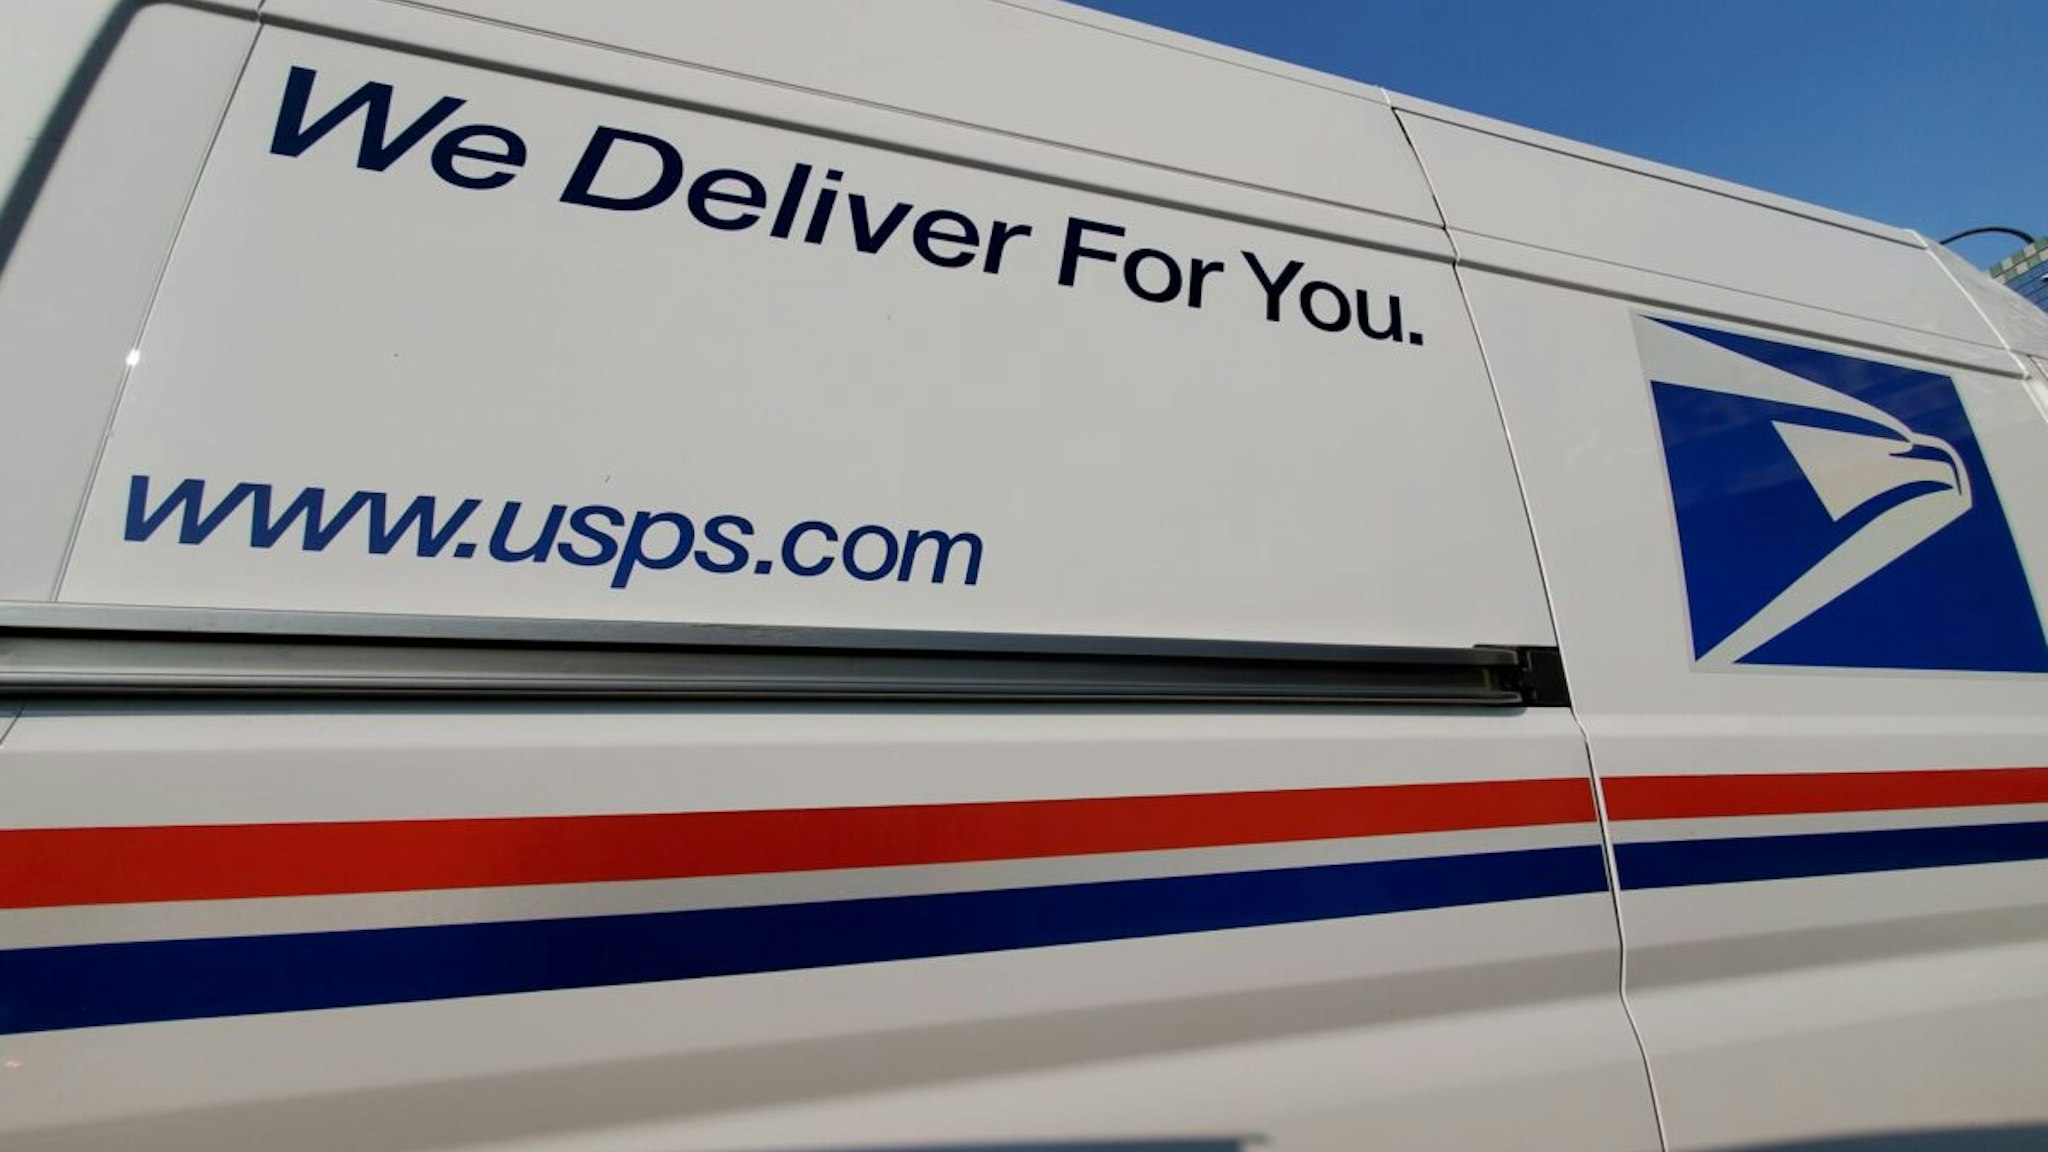 Wide angle view of United States Postal Service (USPS) truck with logo visible, Lafayette, California, September 17, 2020.